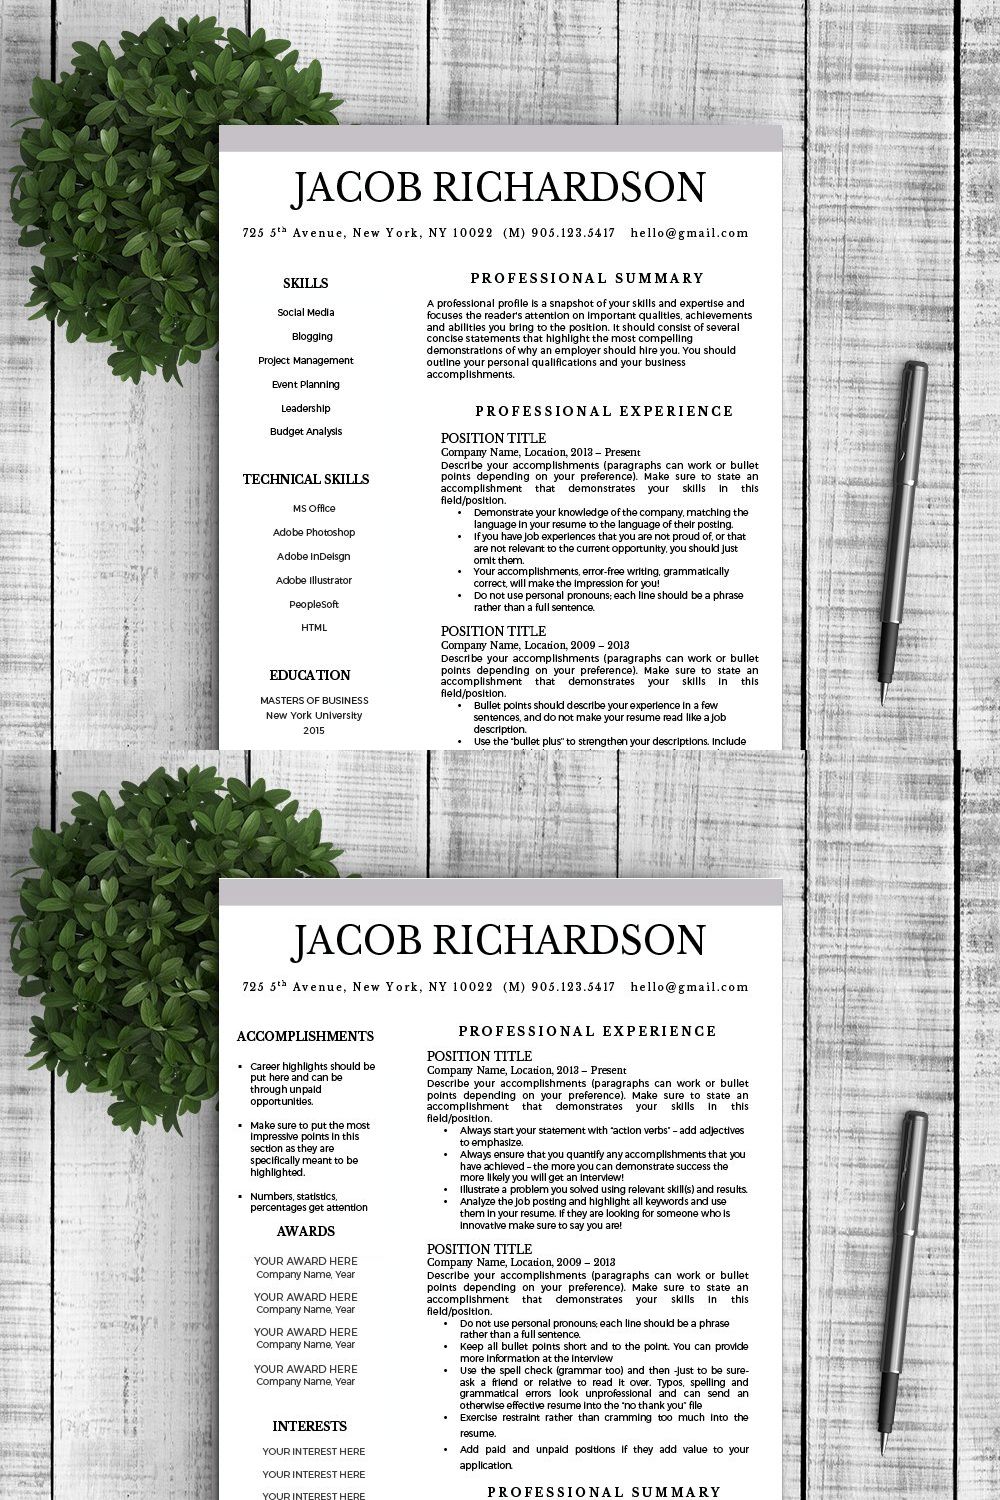 Resume Template "Jacob" pinterest preview image.